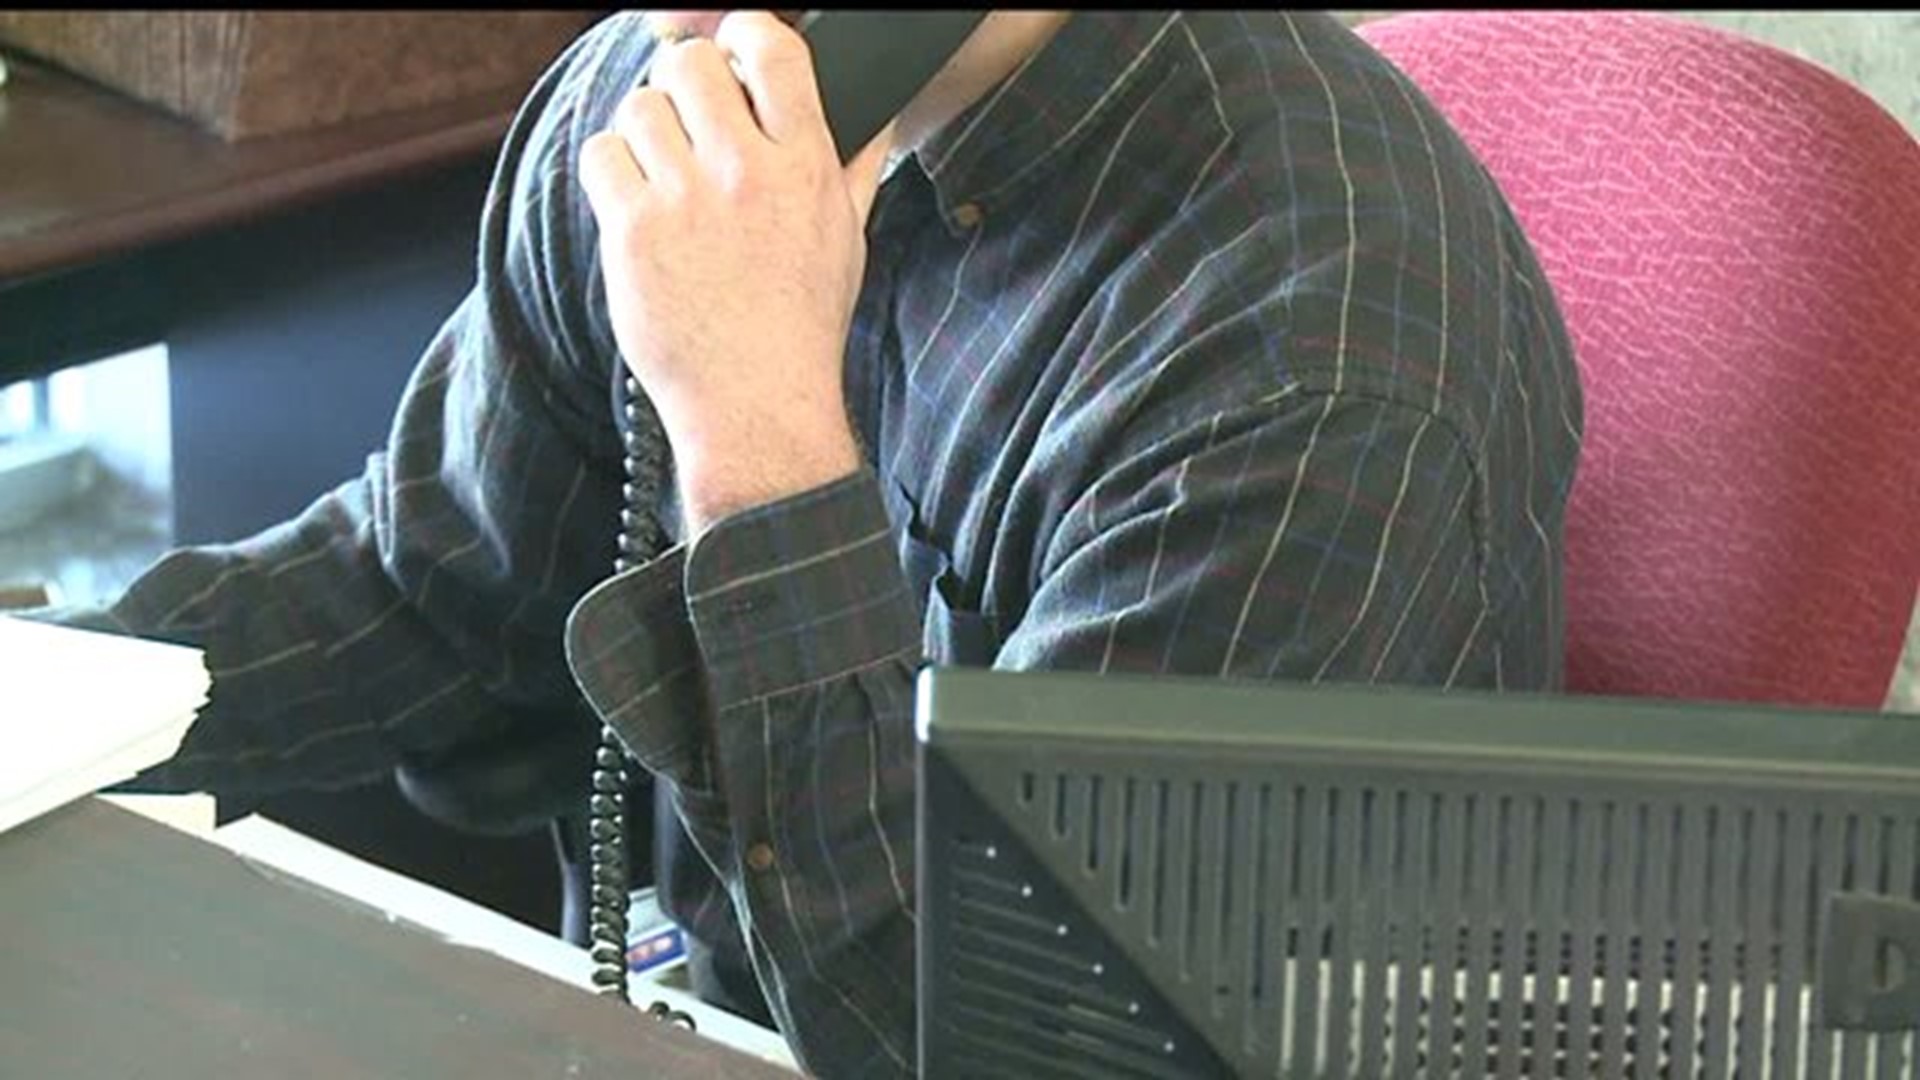 Backlog on background checks affecting volunteers with children